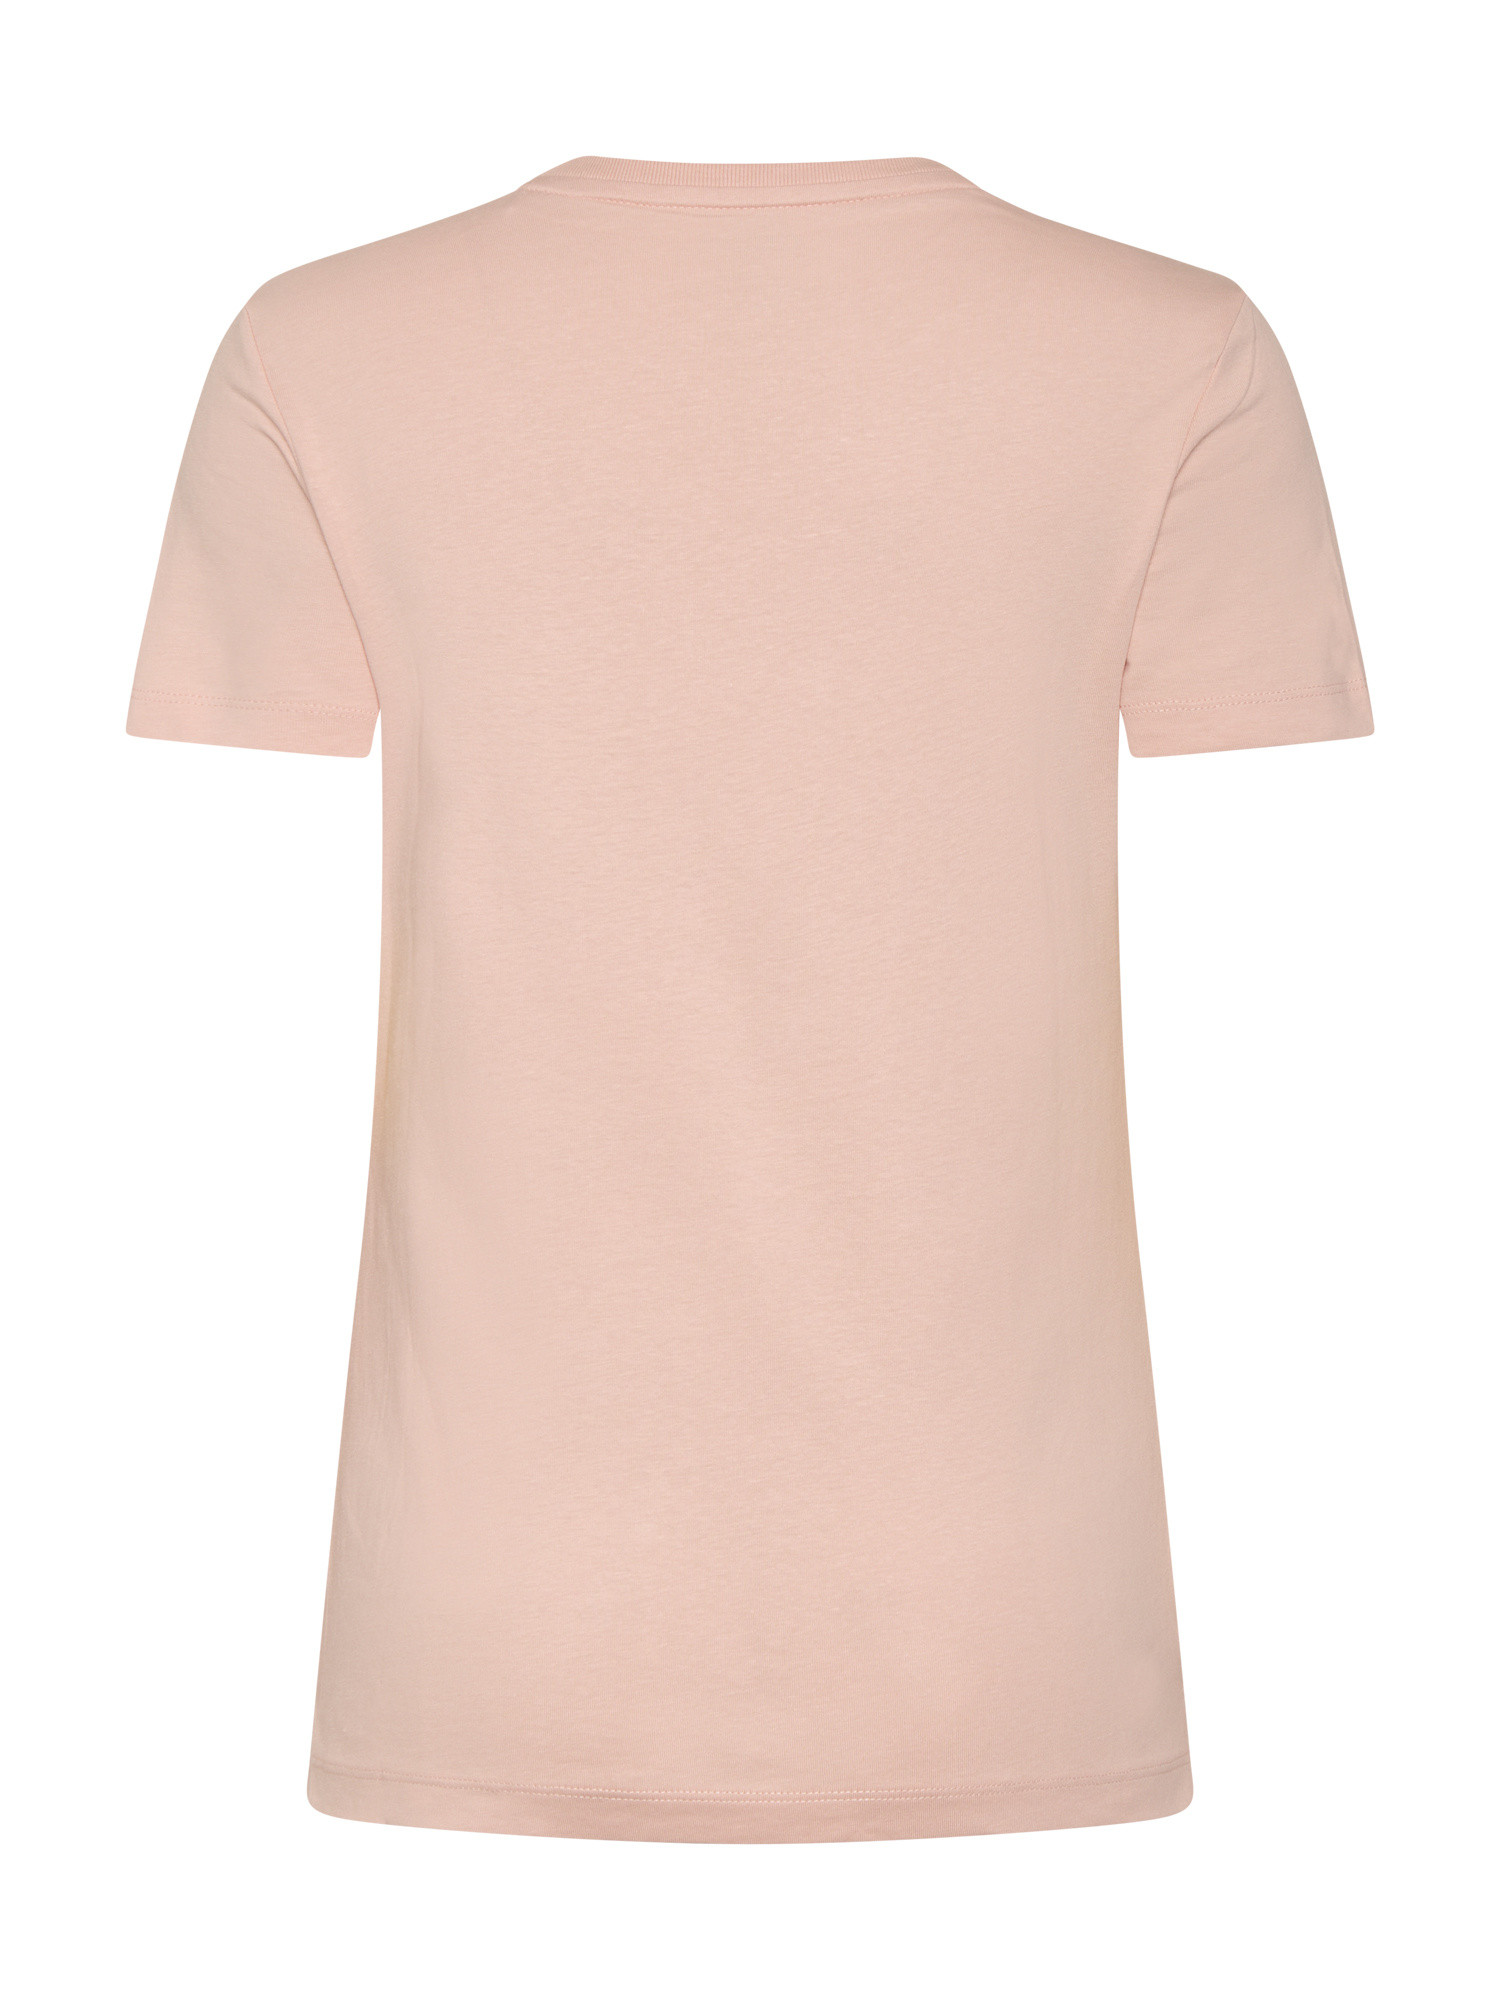 Guess - T-shirt with triangle icon logo, Pink, large image number 1